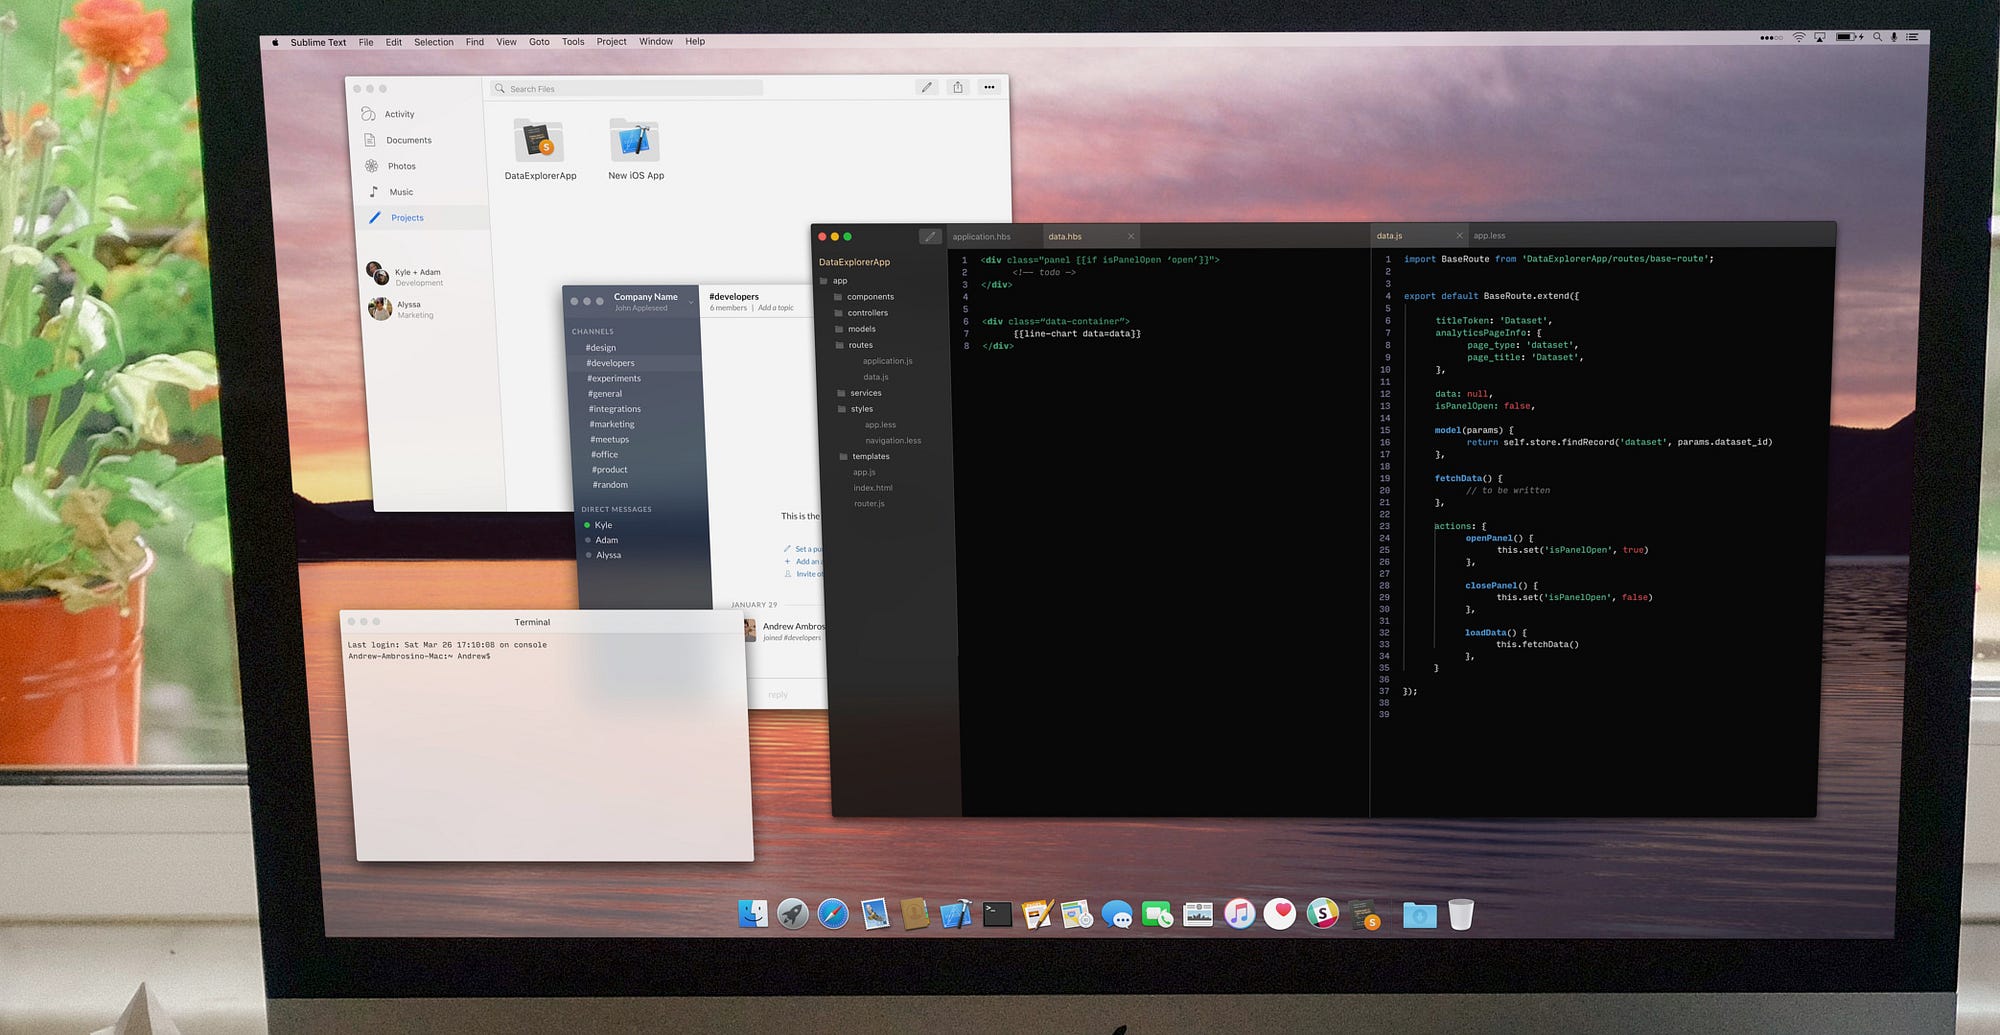 Sublime, Slack, and the new Finder